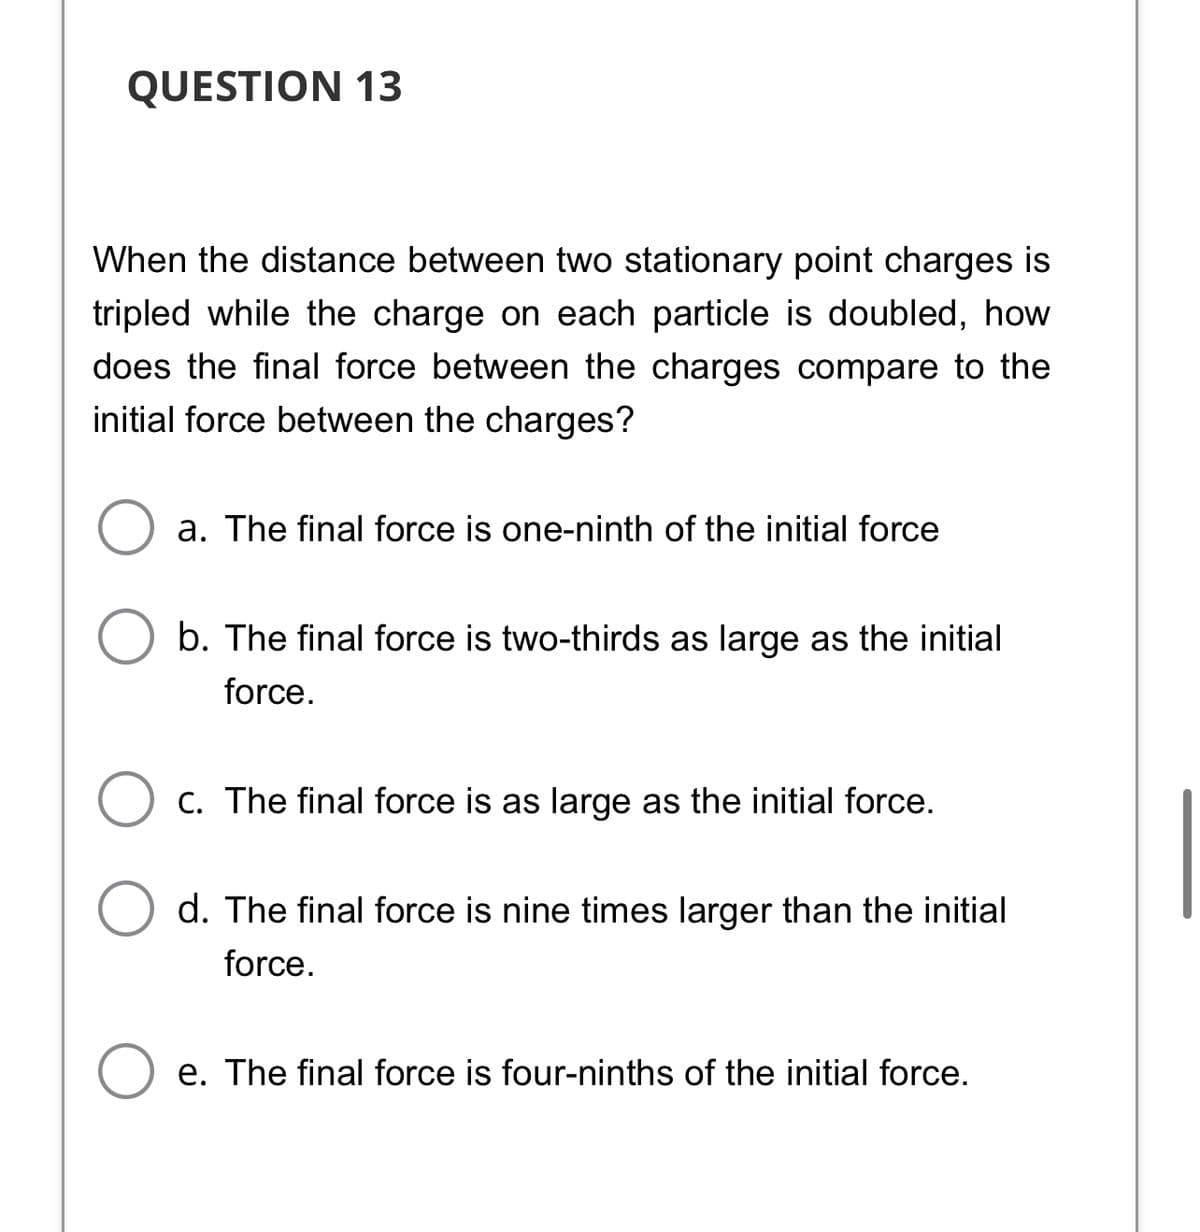 QUESTION 13
When the distance between two stationary point charges is
tripled while the charge on each particle is doubled, how
does the final force between the charges compare to the
initial force between the charges?
a. The final force is one-ninth of the initial force
b. The final force is two-thirds as large as the initial
force.
C. The final force is as large as the initial force.
d. The final force is nine times larger than the initial
force.
e. The final force is four-ninths of the initial force.
